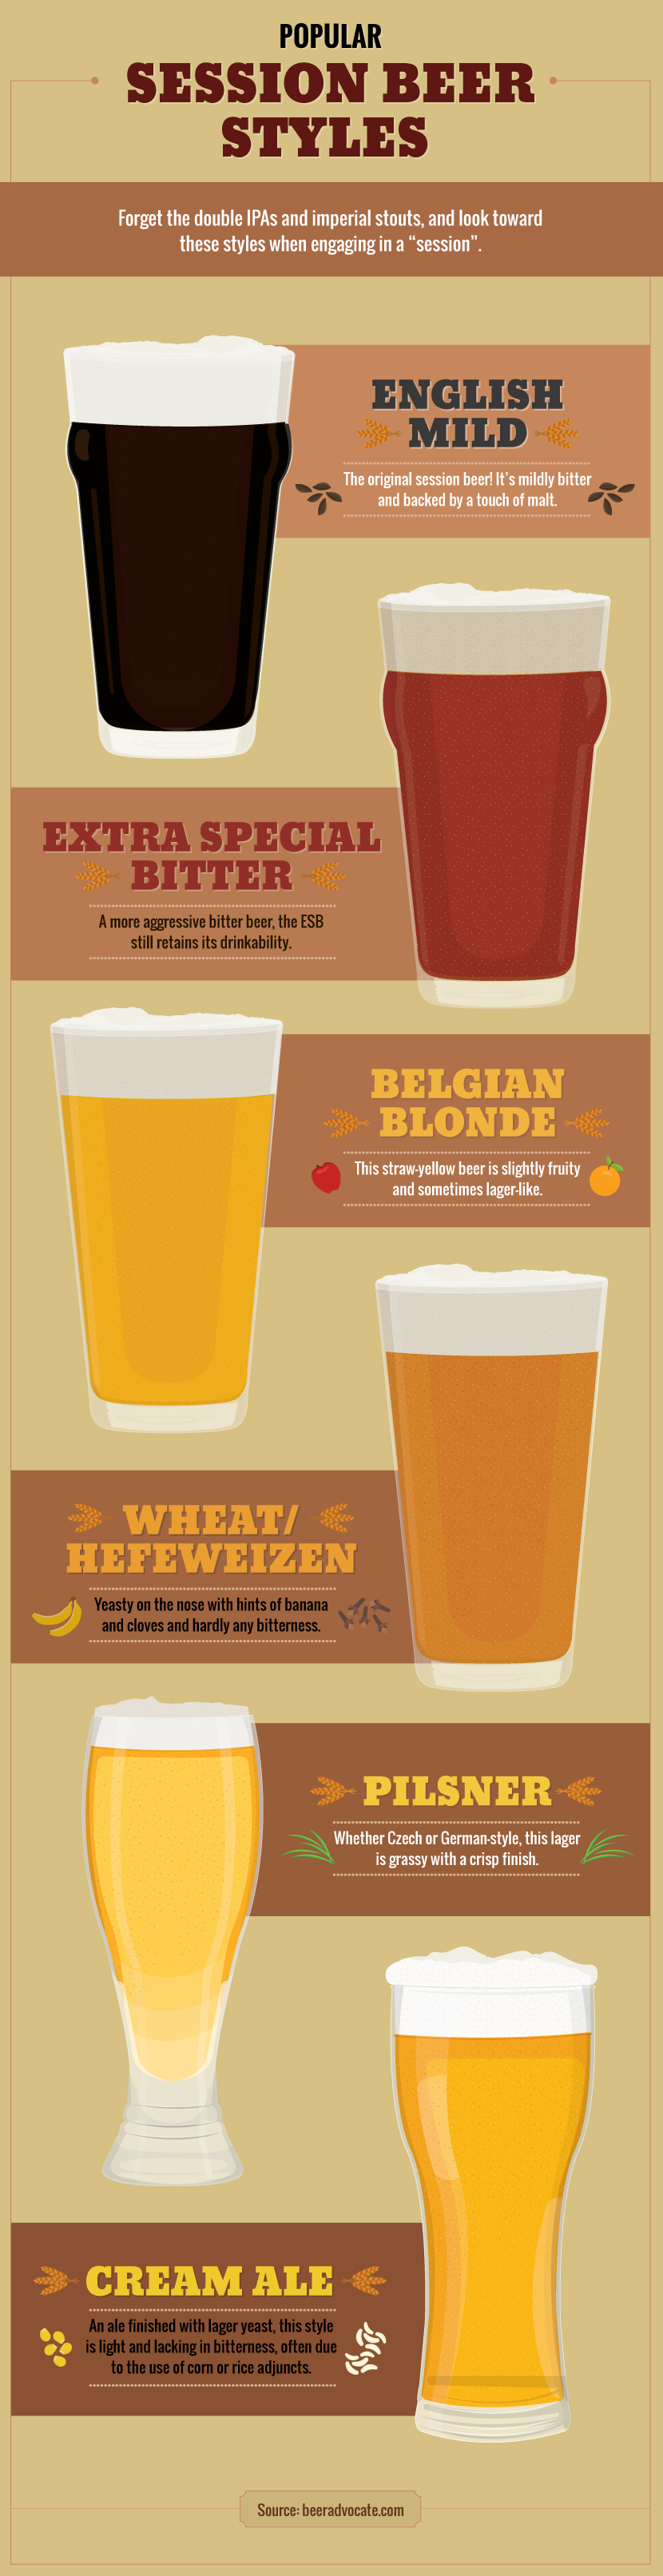 Most Popular Sessionable Beer Styles - What Makes Beer Sessionable?